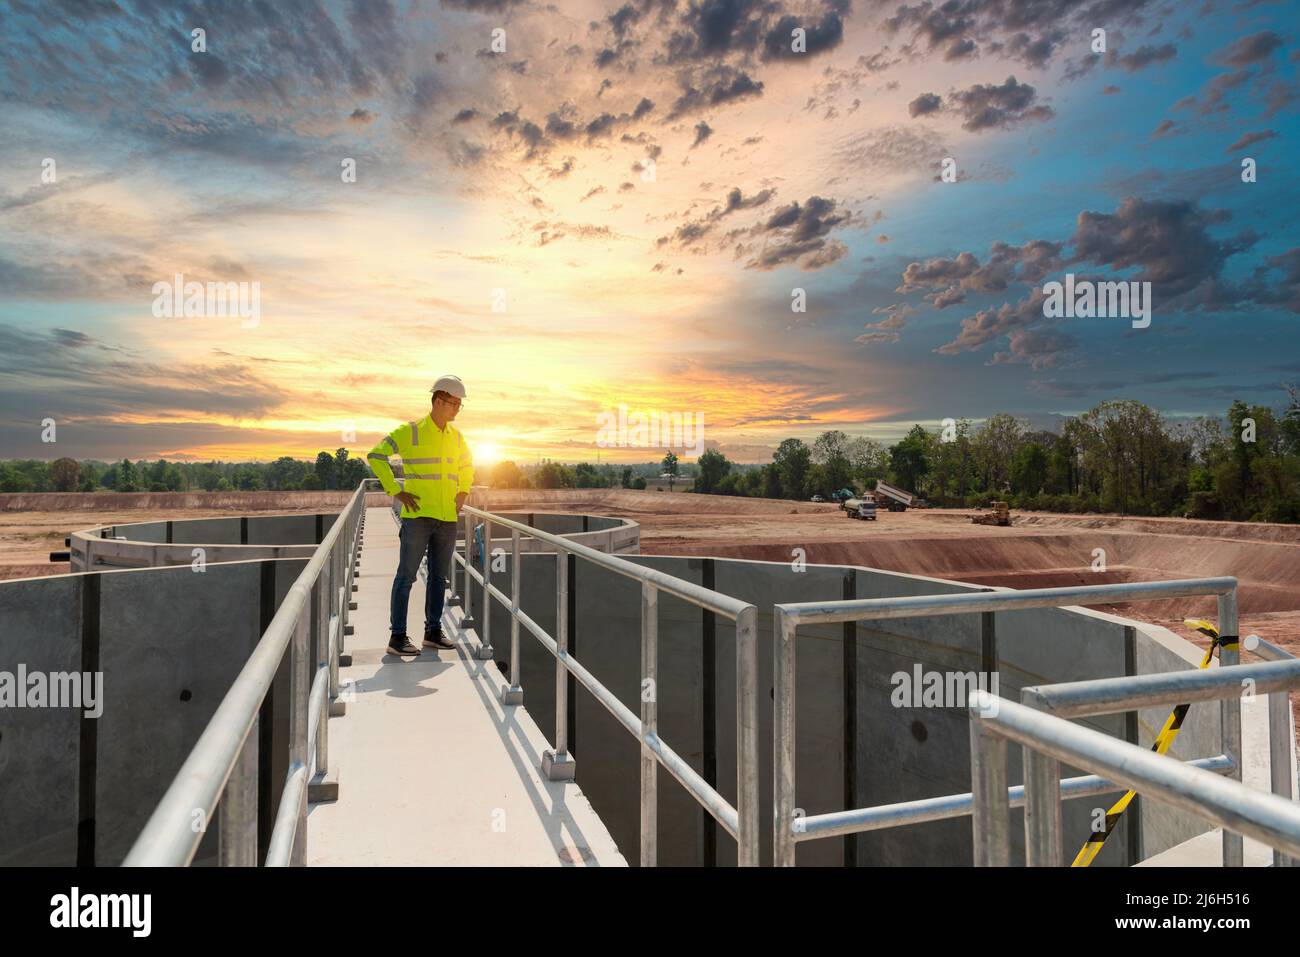 Civil Engineer inspects the construction of a large sewage-water treatment pipe unfinished Stock Photo